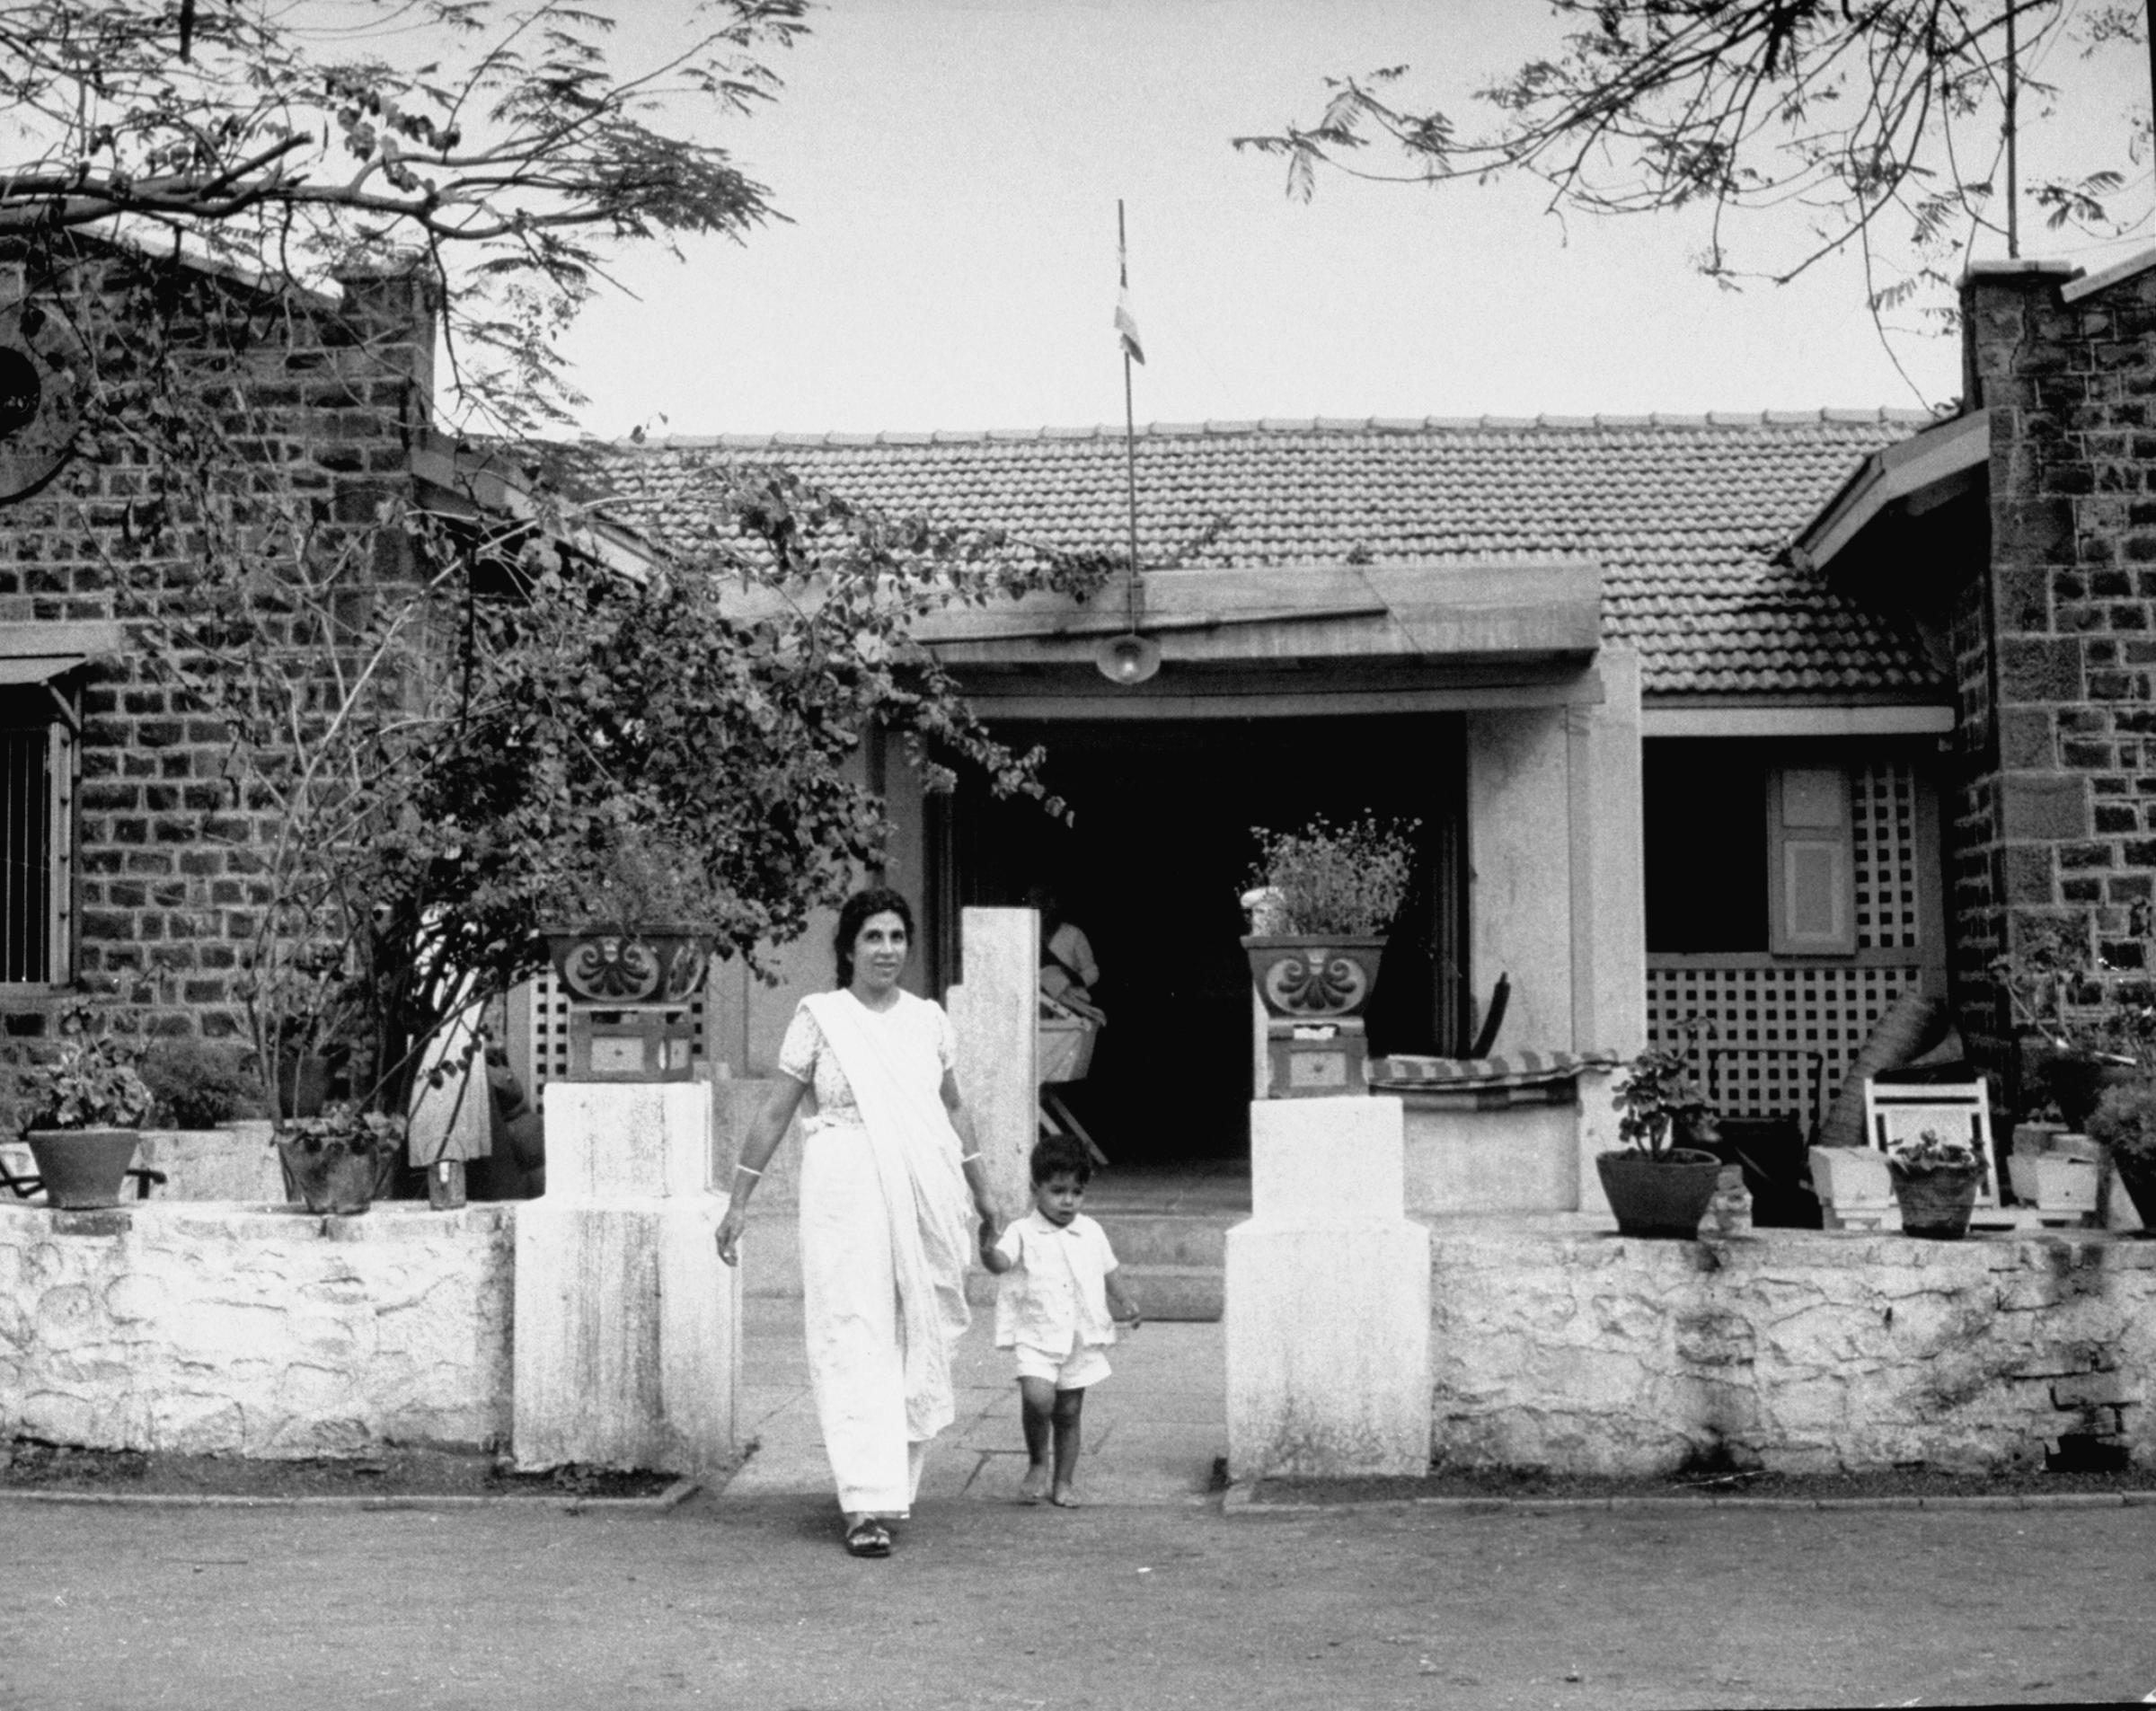 The wife of Indian activist and political leader Jai Prakash Narain departs with her child from Gandhi's nature clinic in 1946.